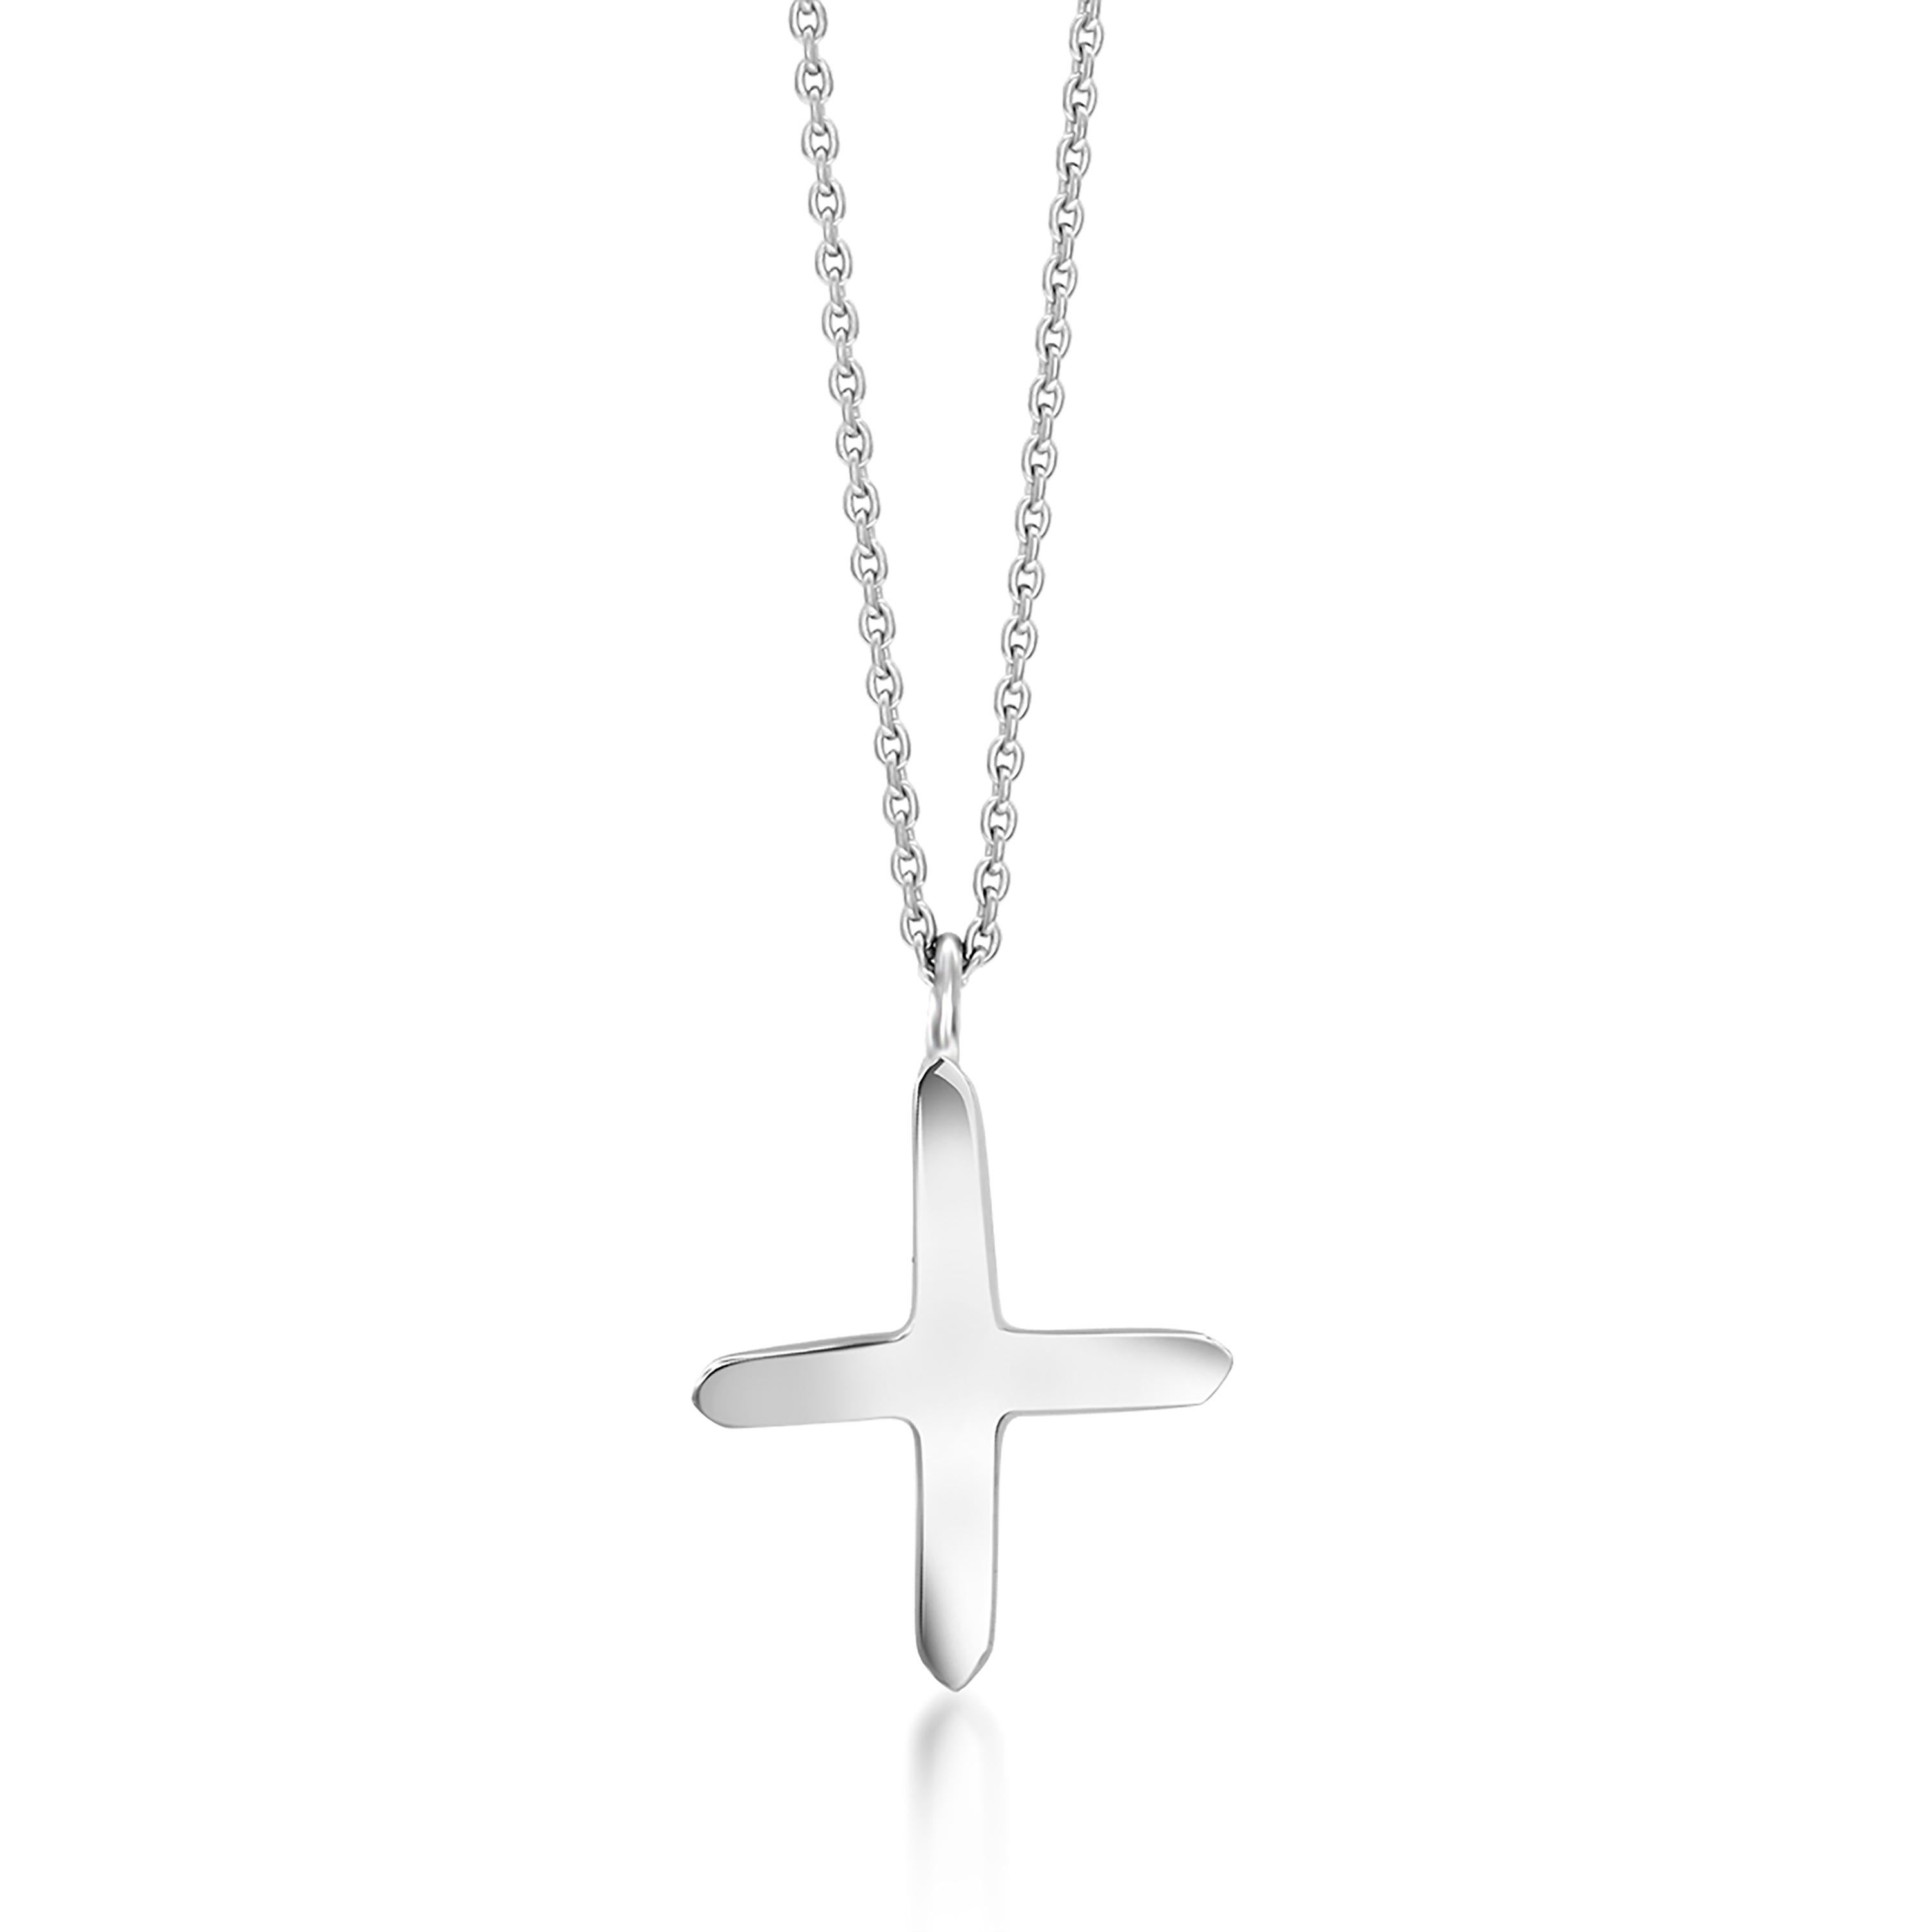 Contemporary 14 Karat White Gold Pendant Necklace with Cross Charm